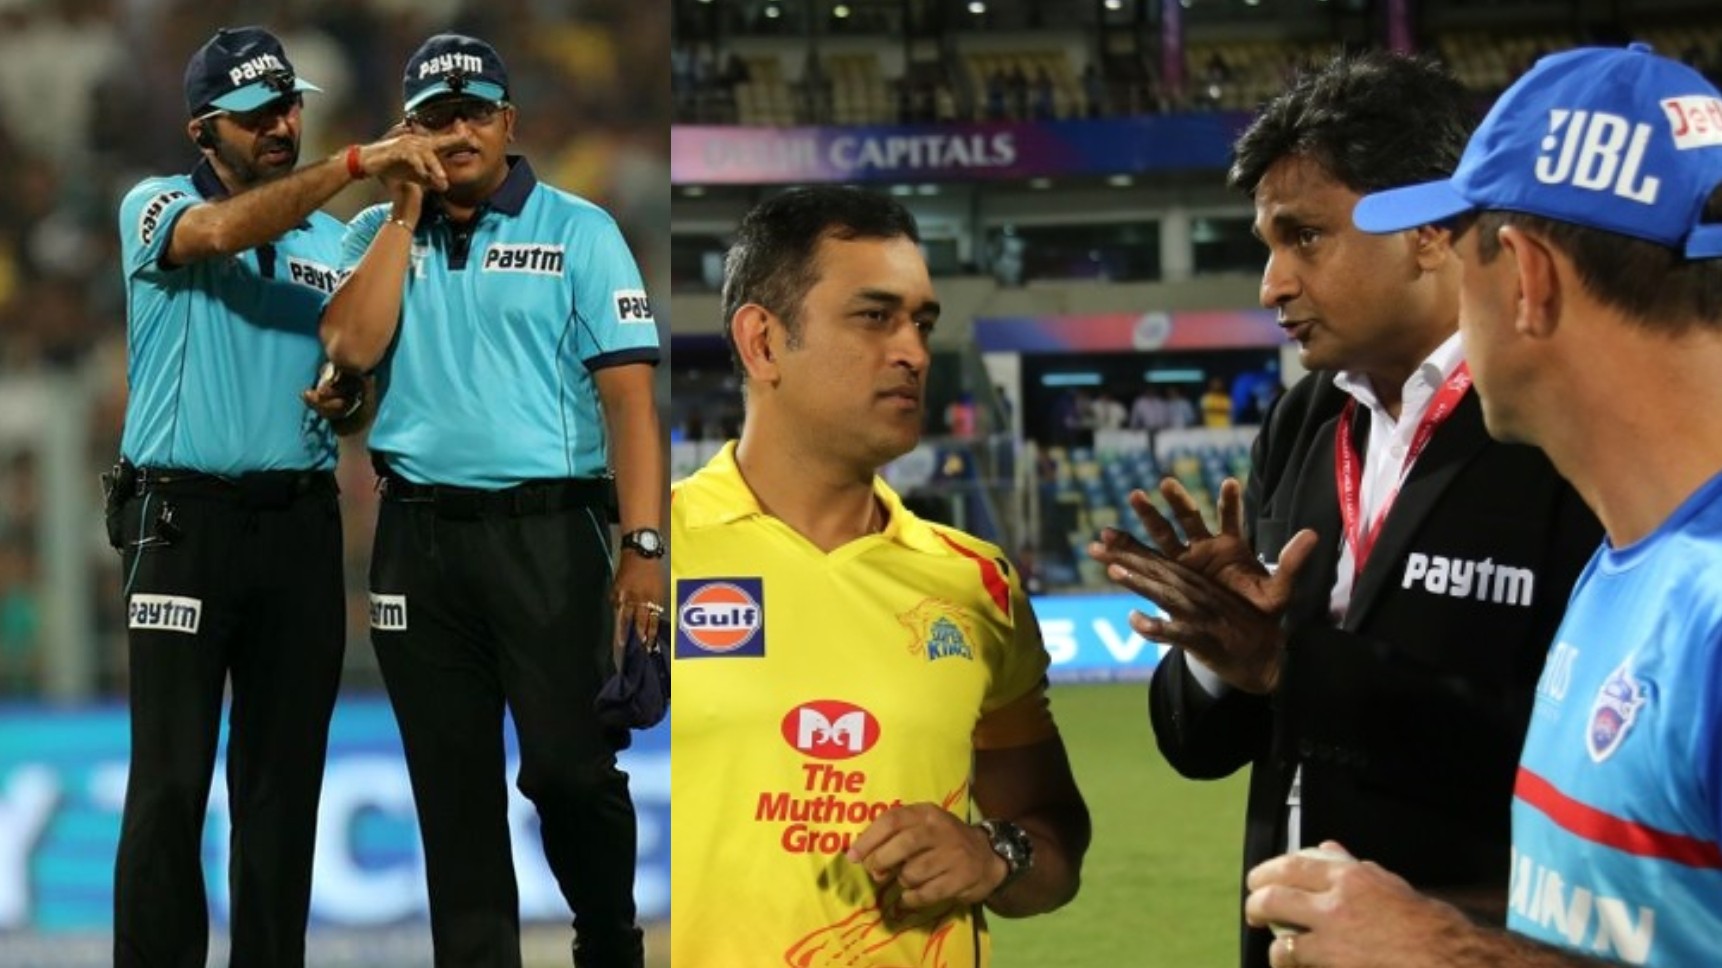 IPL 2020: All the umpires, match-referees and officials for IPL 13 clear COVID-19 tests